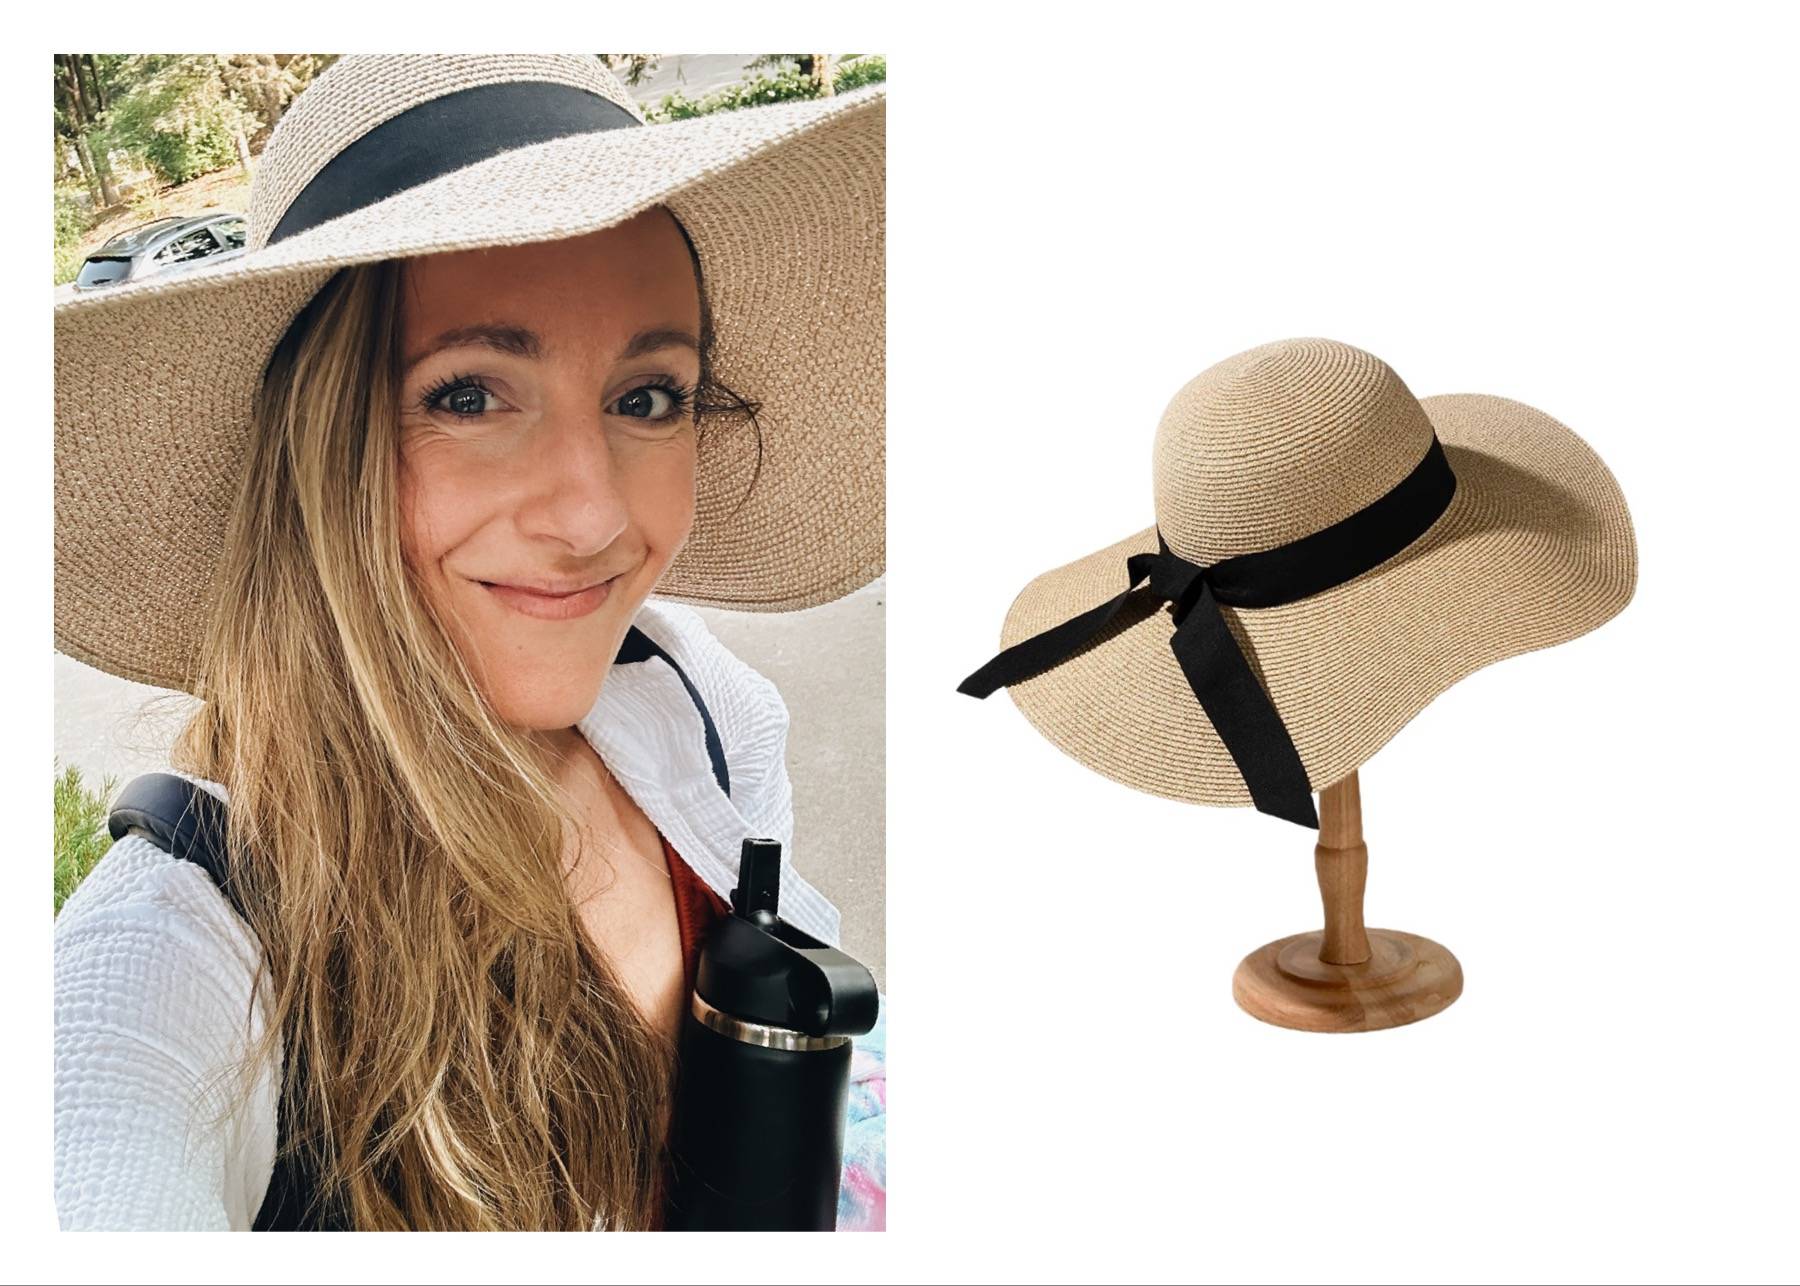 Woman wearing a sun hat taking a selfie next to a stock photo of a sun hat.